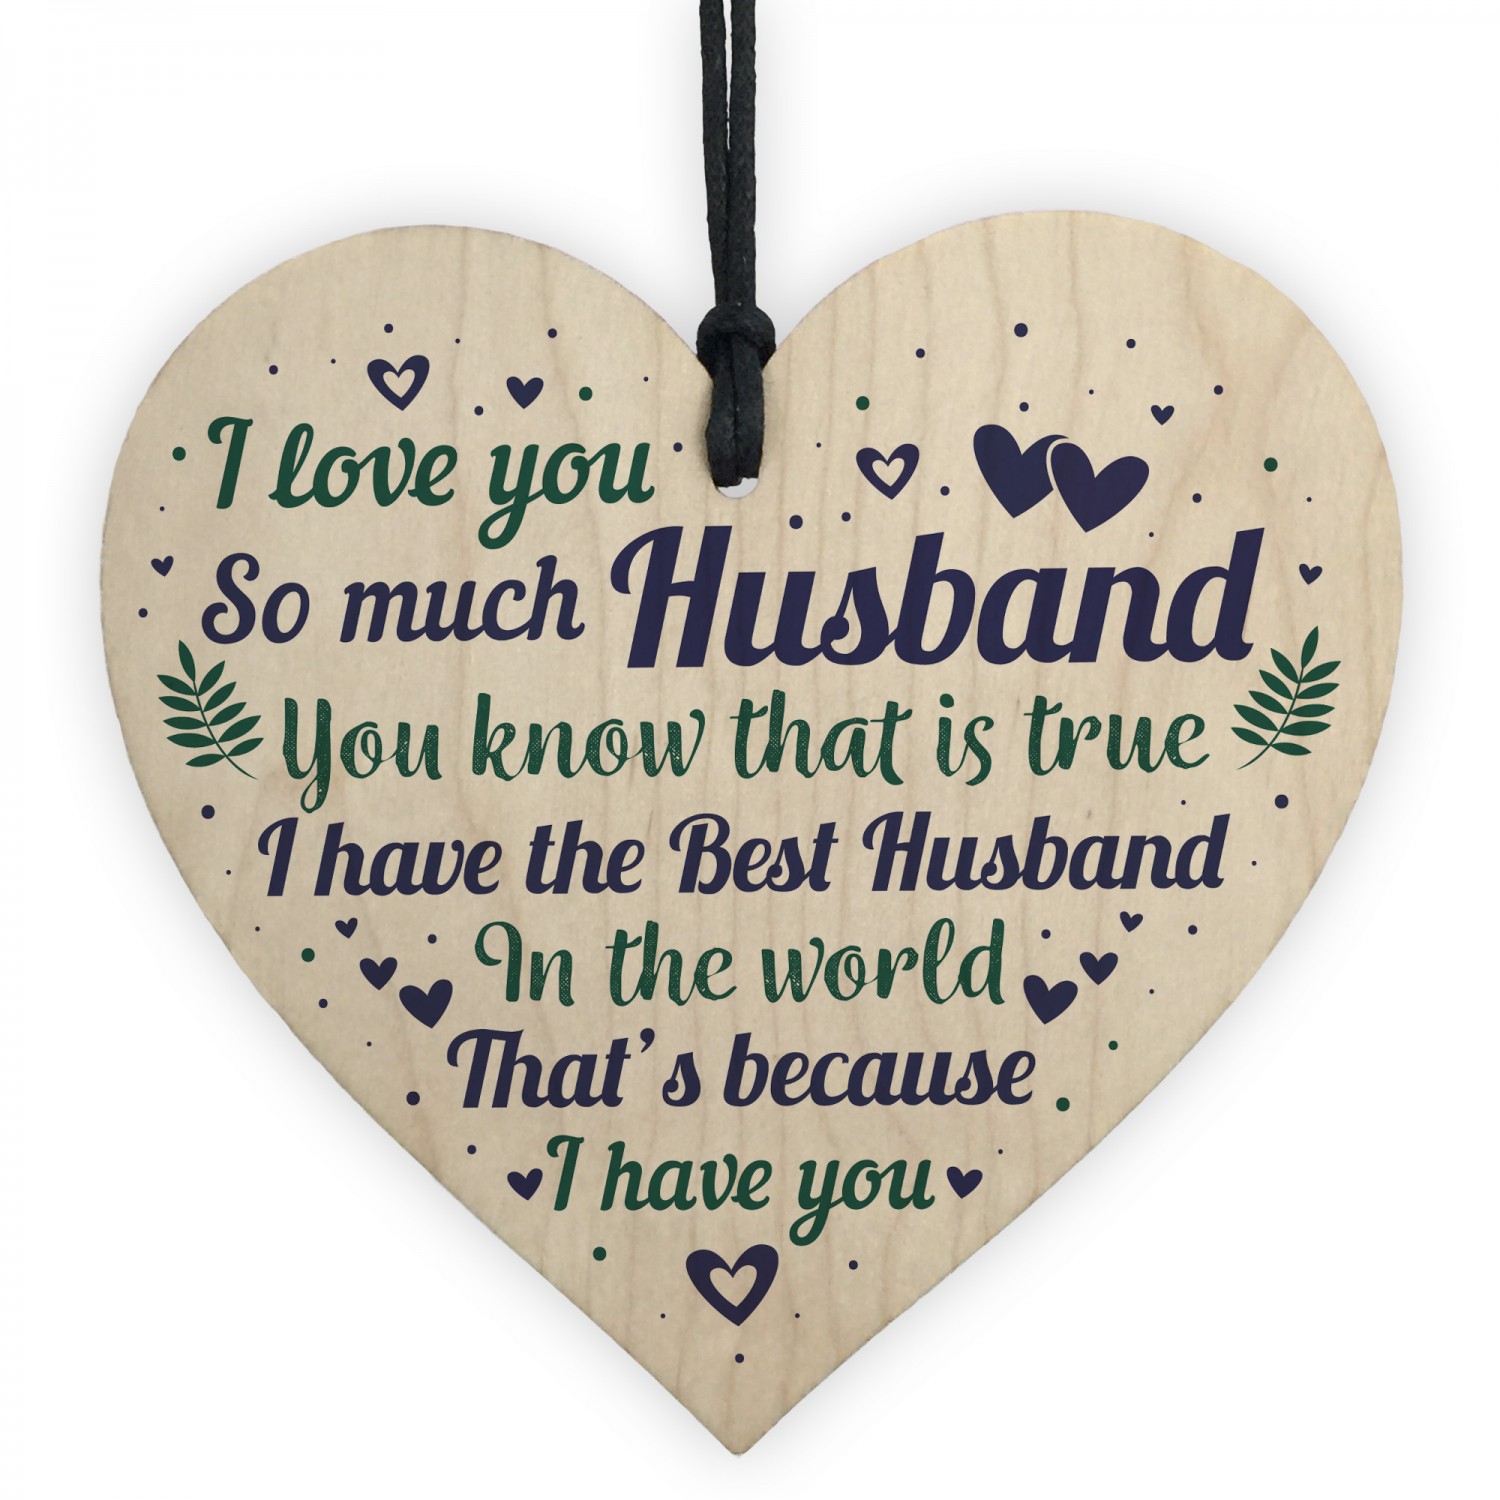 The best husband you are “You are